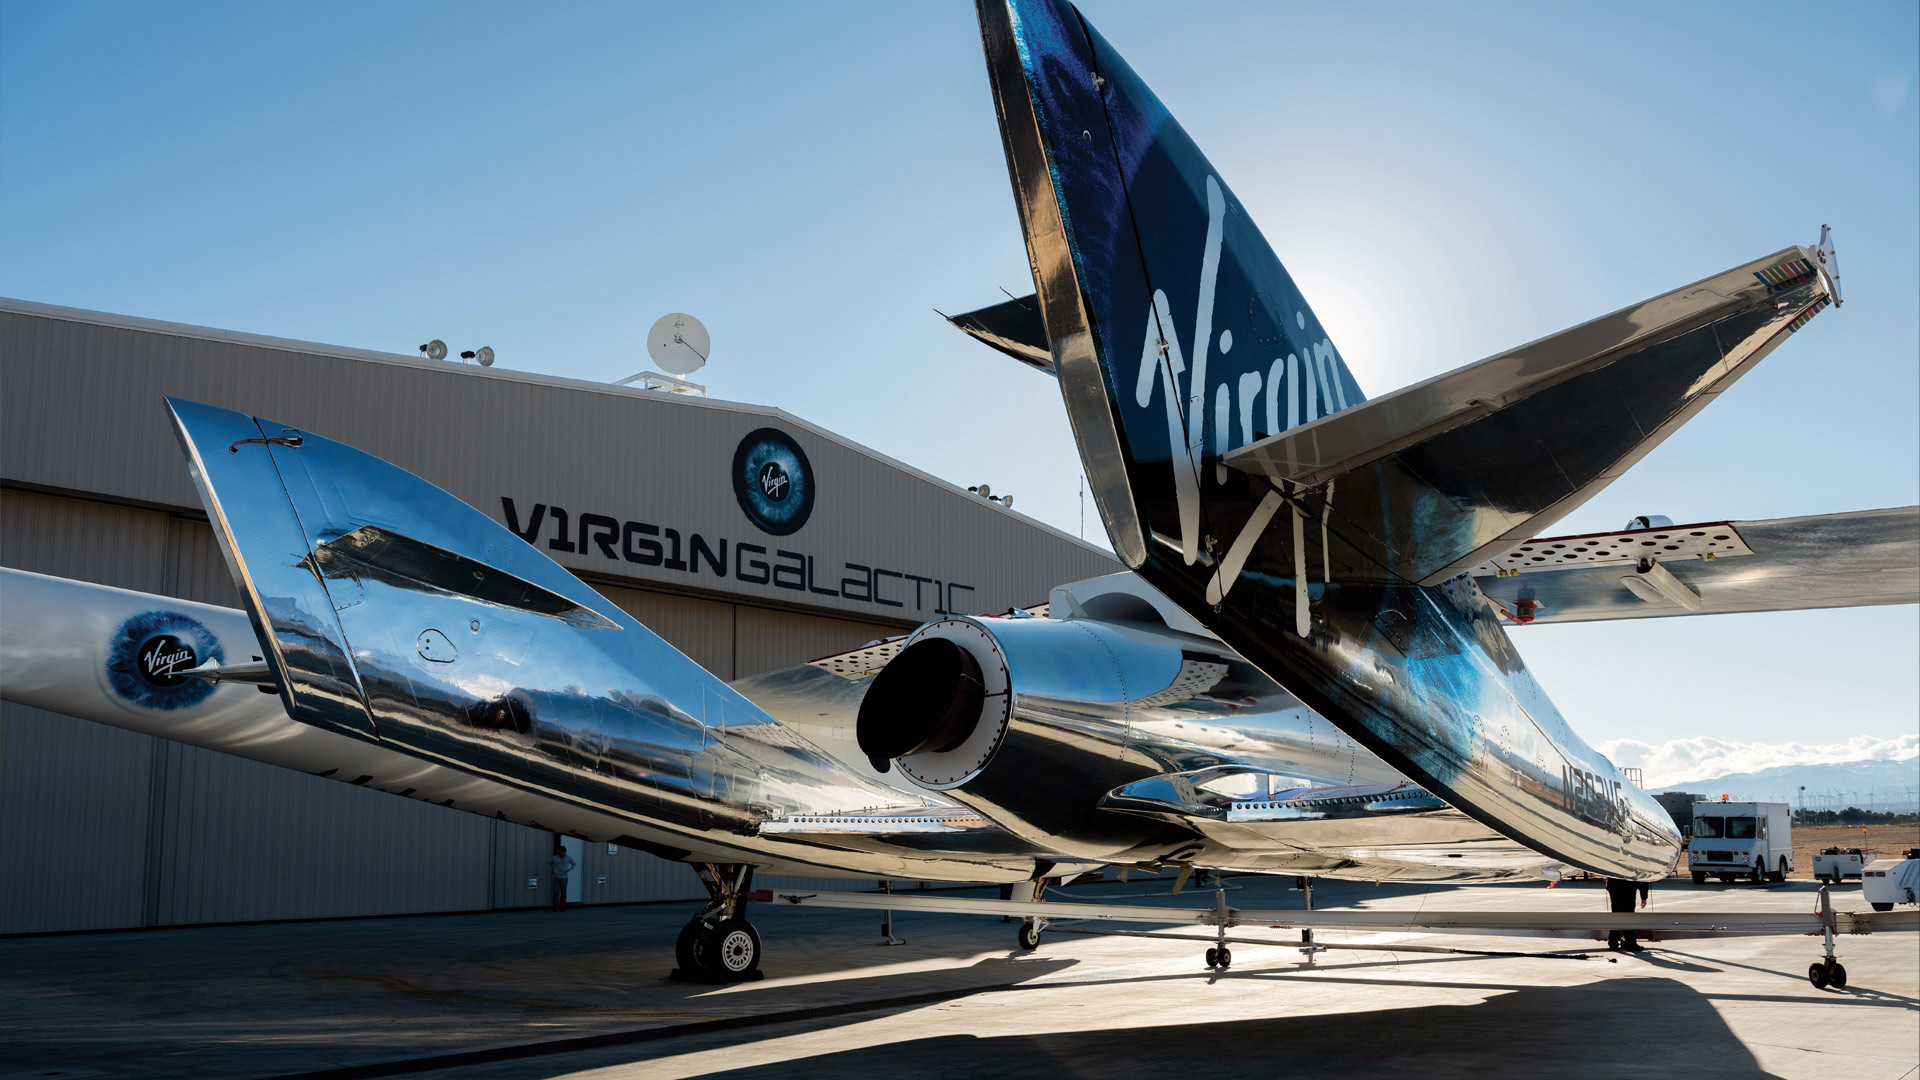 A Look Inside The Virgin Galactic WhiteKnightTwo